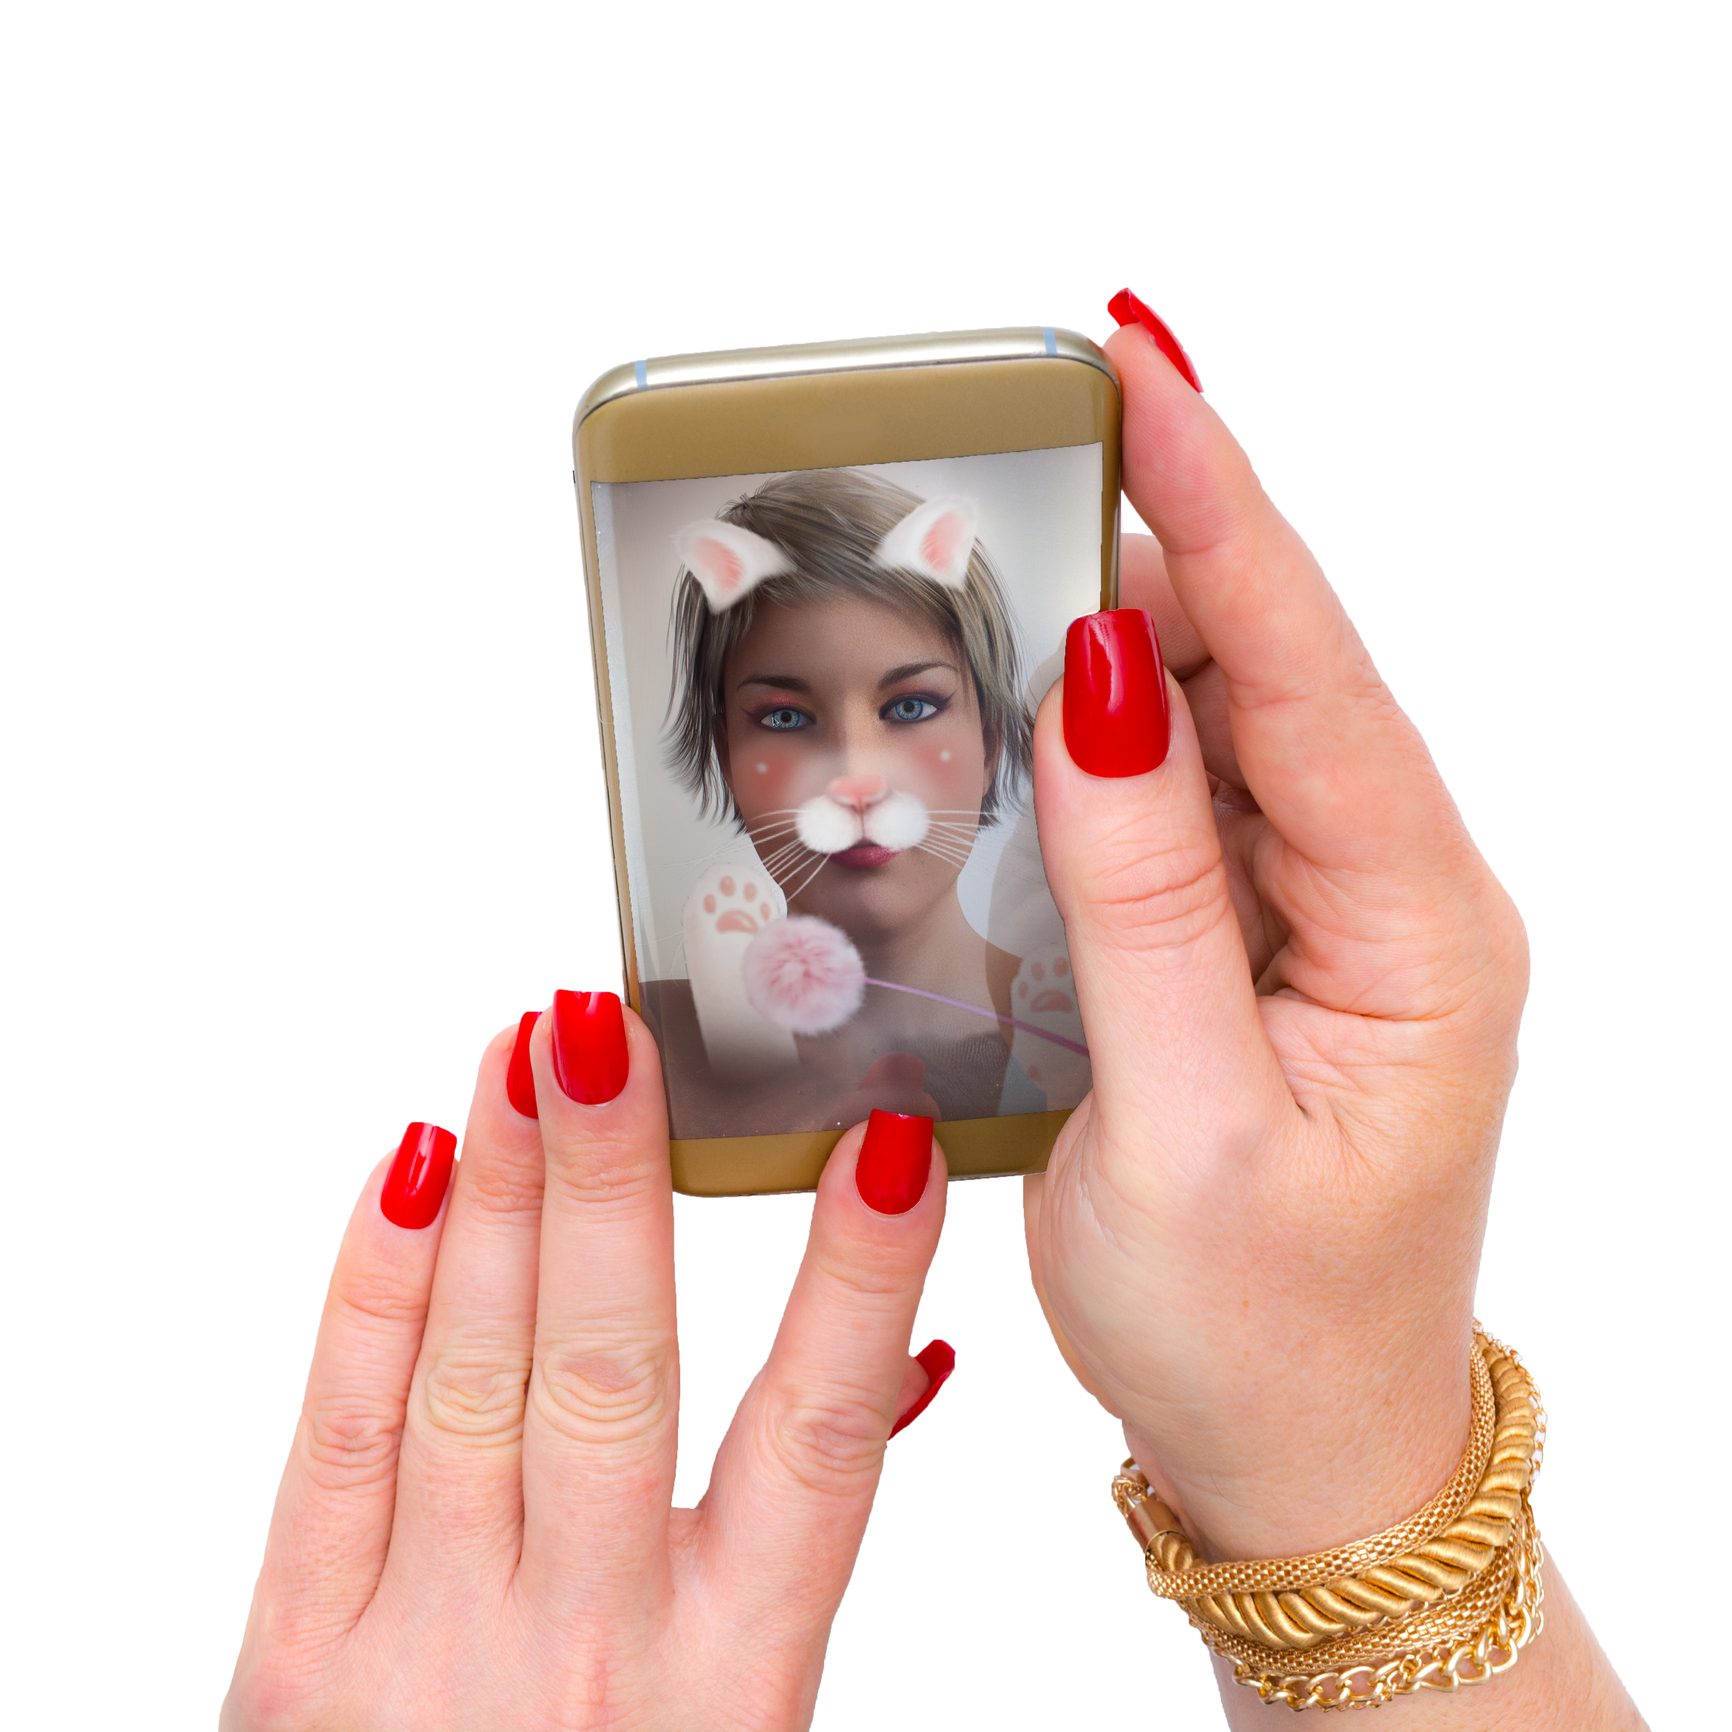 Online Dating: Will People Ever Stop The Trend Of Uploading Photos With Animal Face Filters?